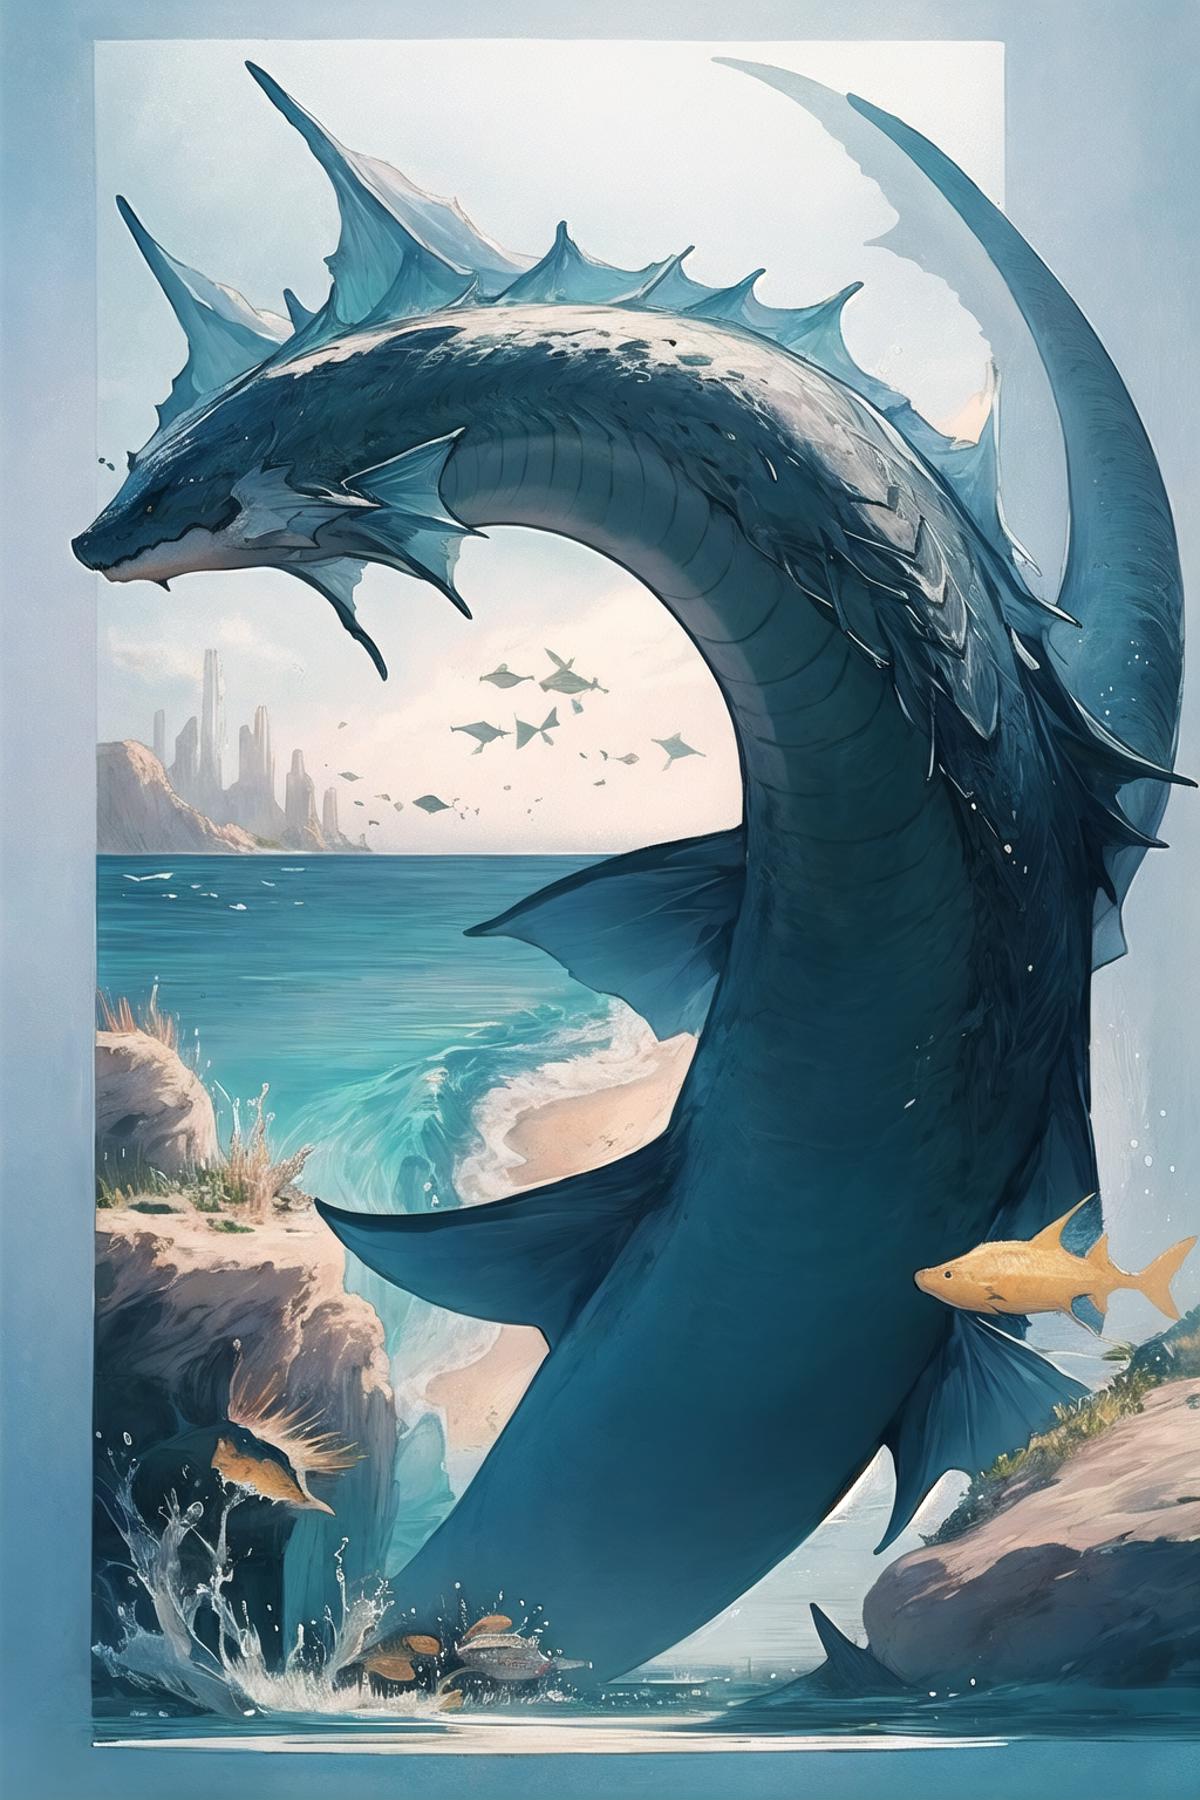 [LoRA] Sea dragon / 海竜 Concept (With dropout & noise version) image by L_A_X